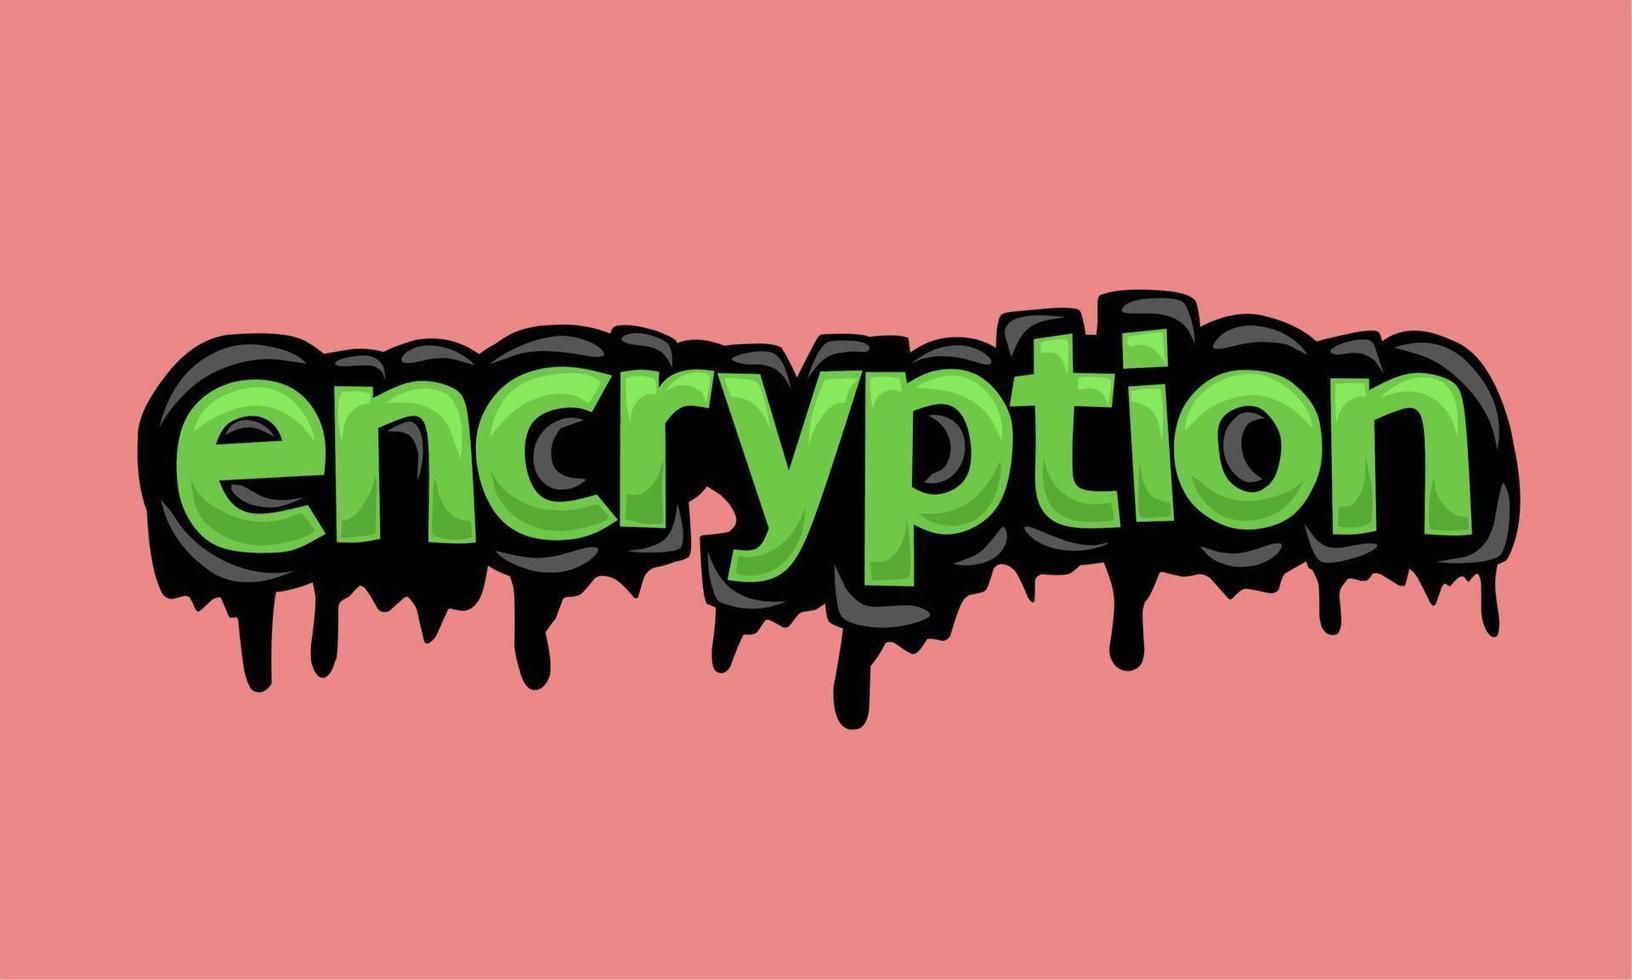 ENCRYPTION writing vector design on pink background